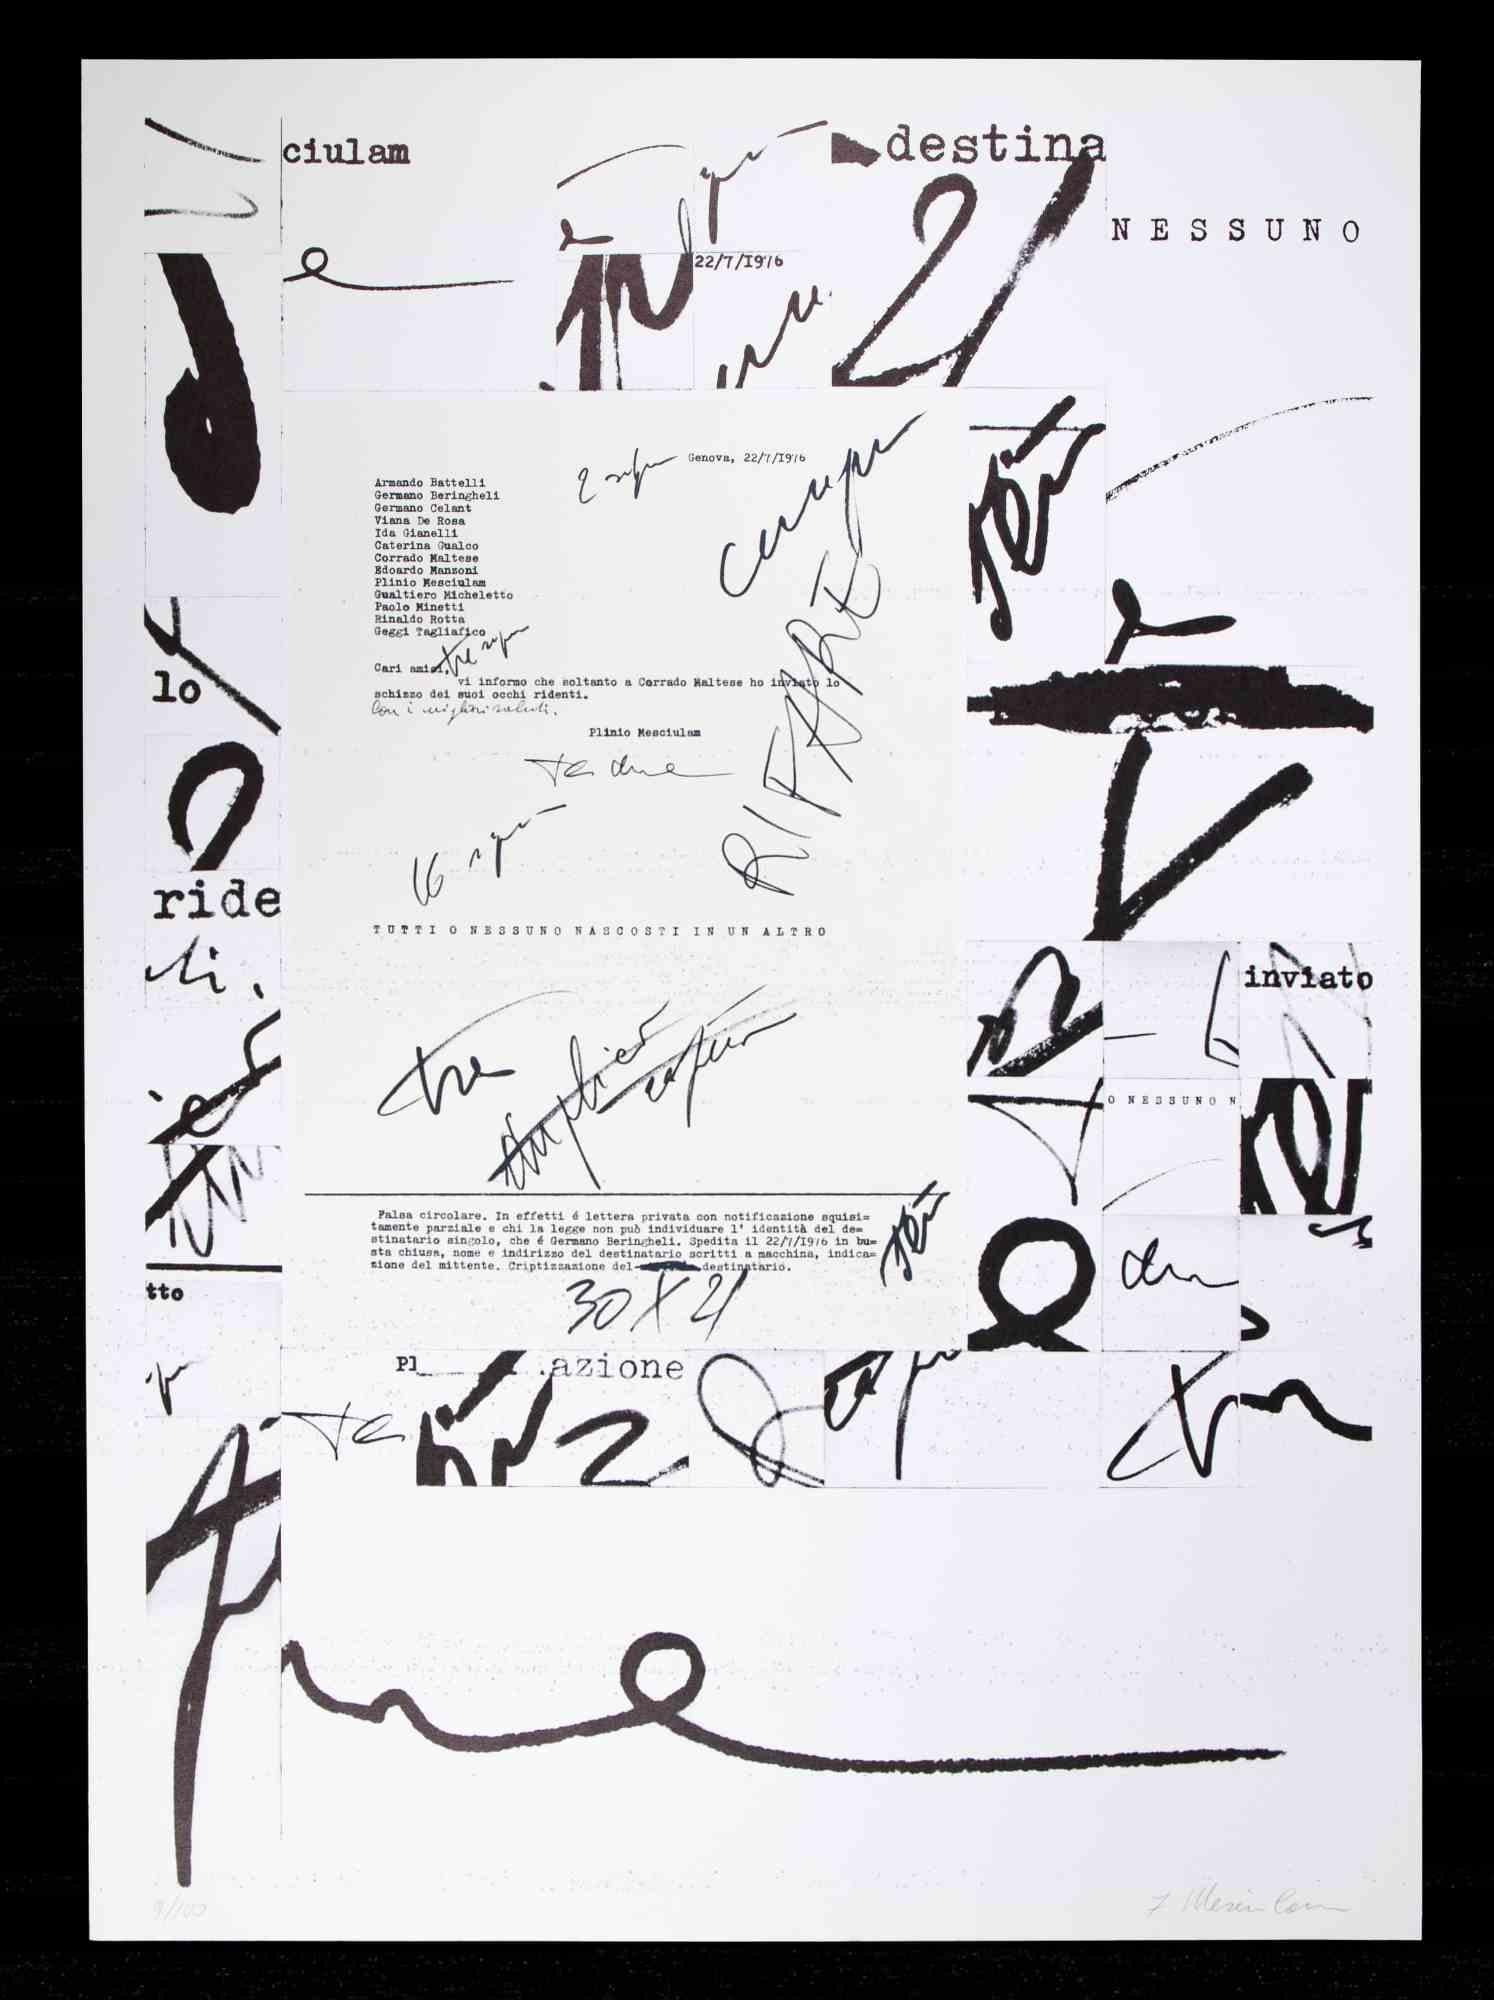 Abstract Composition is an Original Lithograph realized by Plinio Mesciulam in 1973.

Very good condition on a white cardboard.

Hand-signed and numbered by the artist on the lower margin.

Limite edition n.9 of 100 copies, editor " La Nuova Foglio